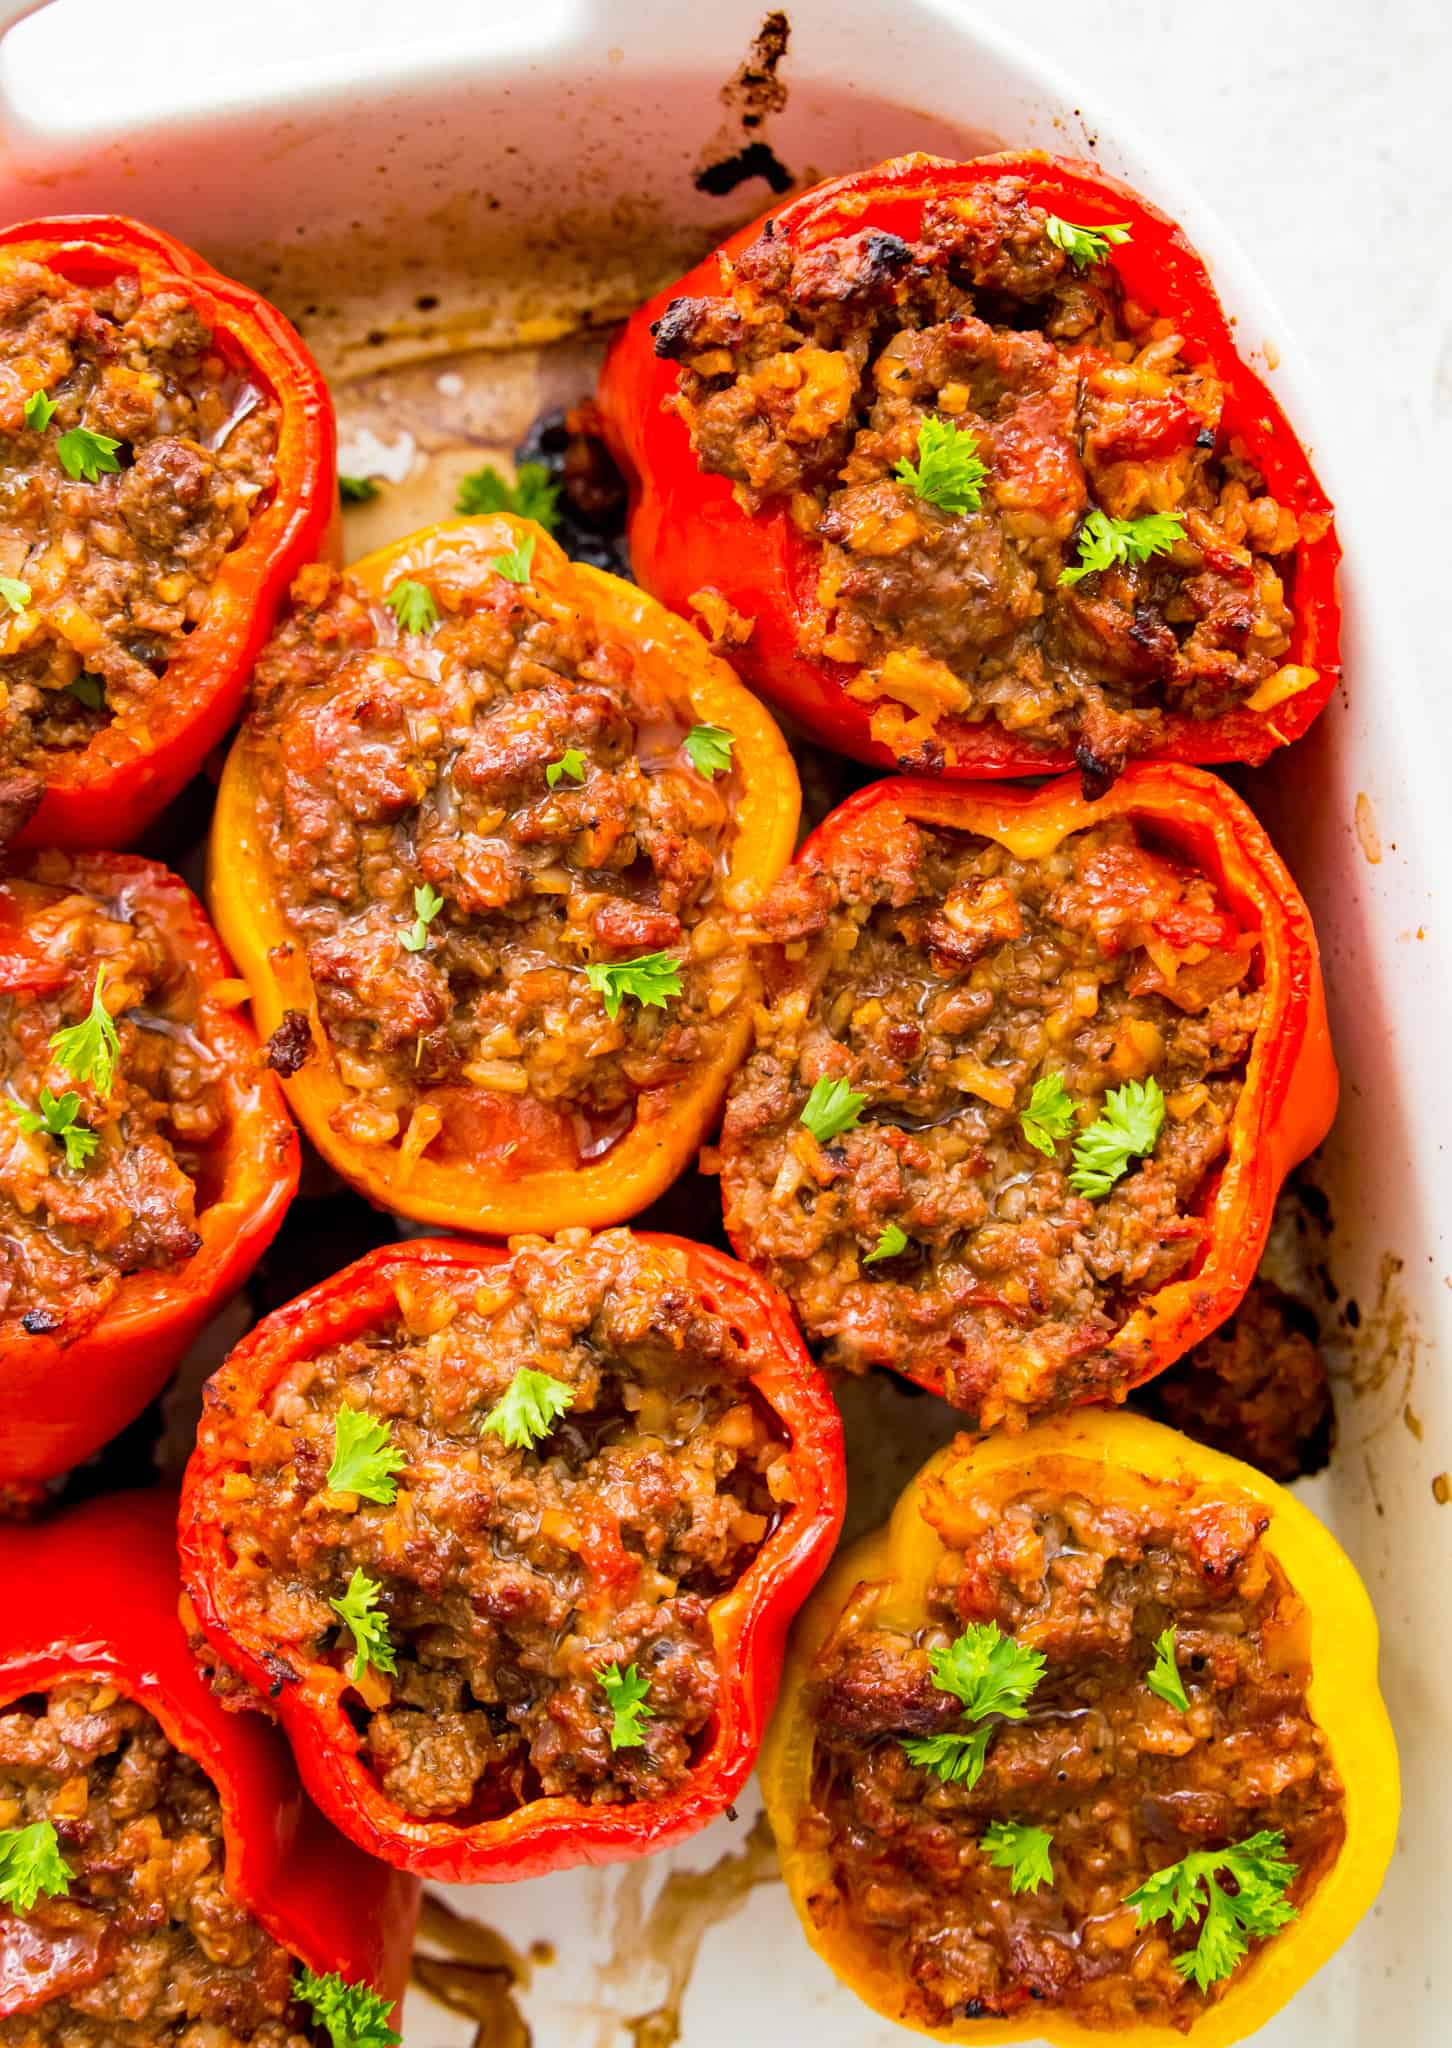 A baking pan full of cooked Whole30 stuffed peppers garnished with cilantro